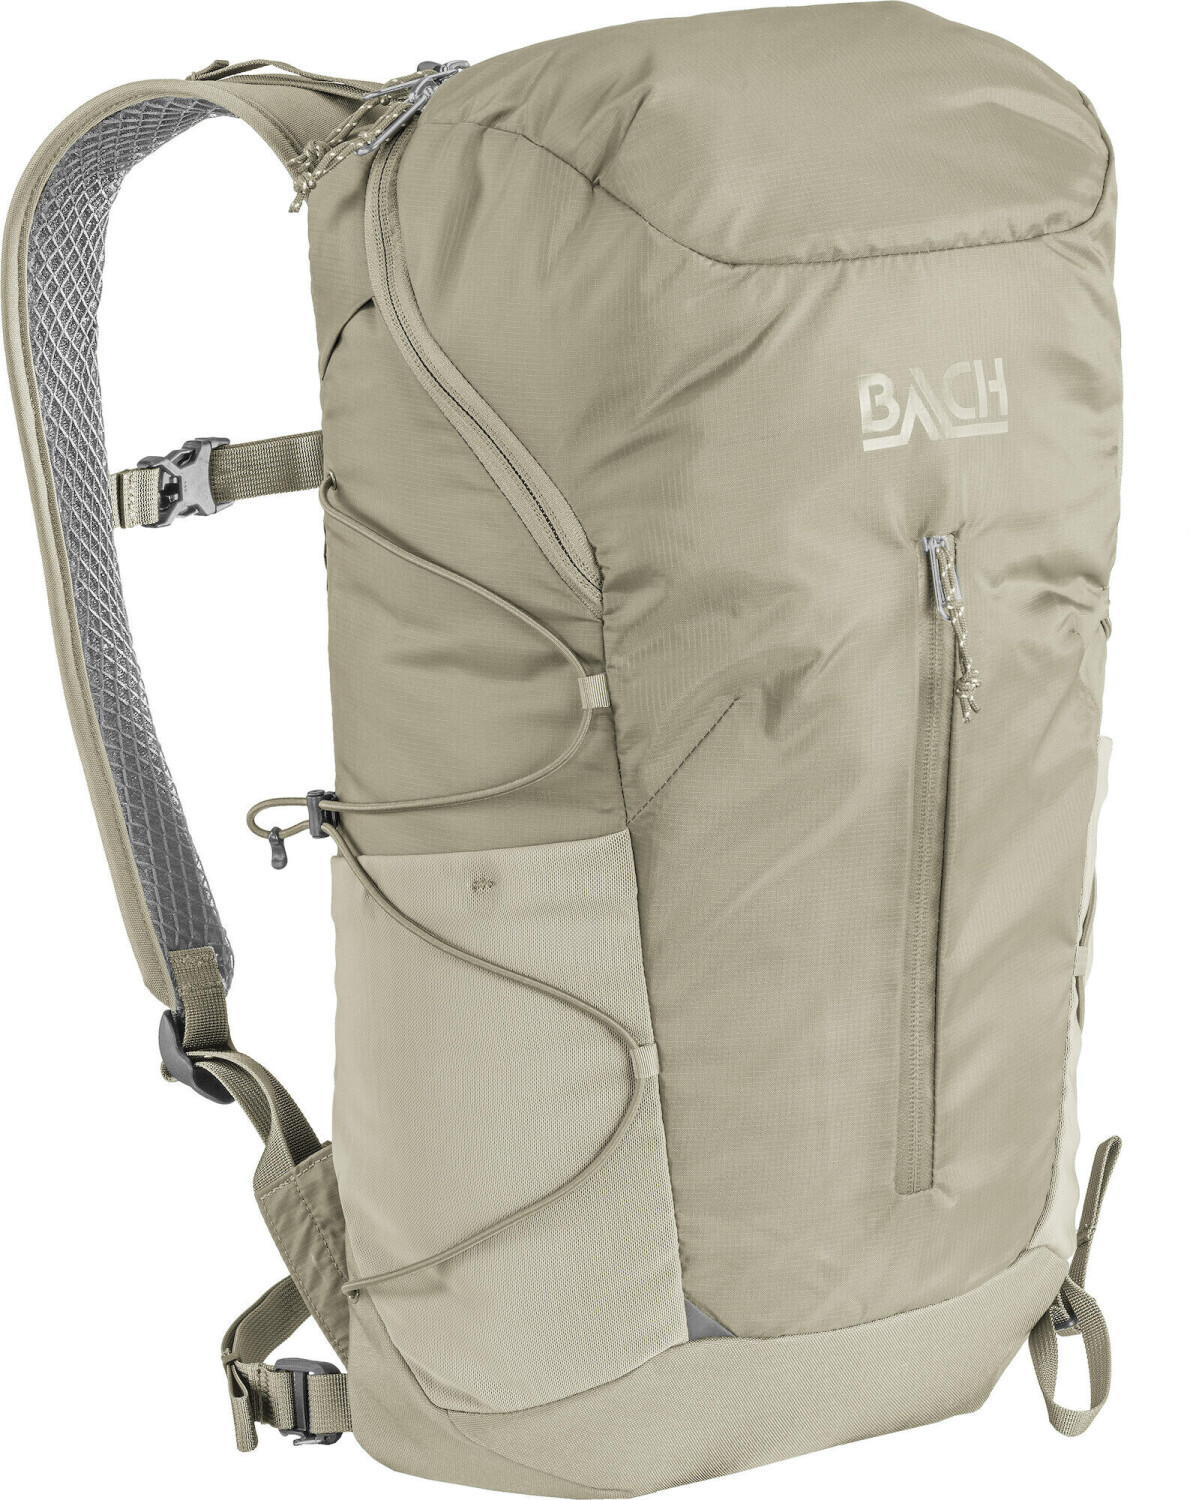 Photos - Backpack Bach Equipment  Shield 20  sand beige (297059)